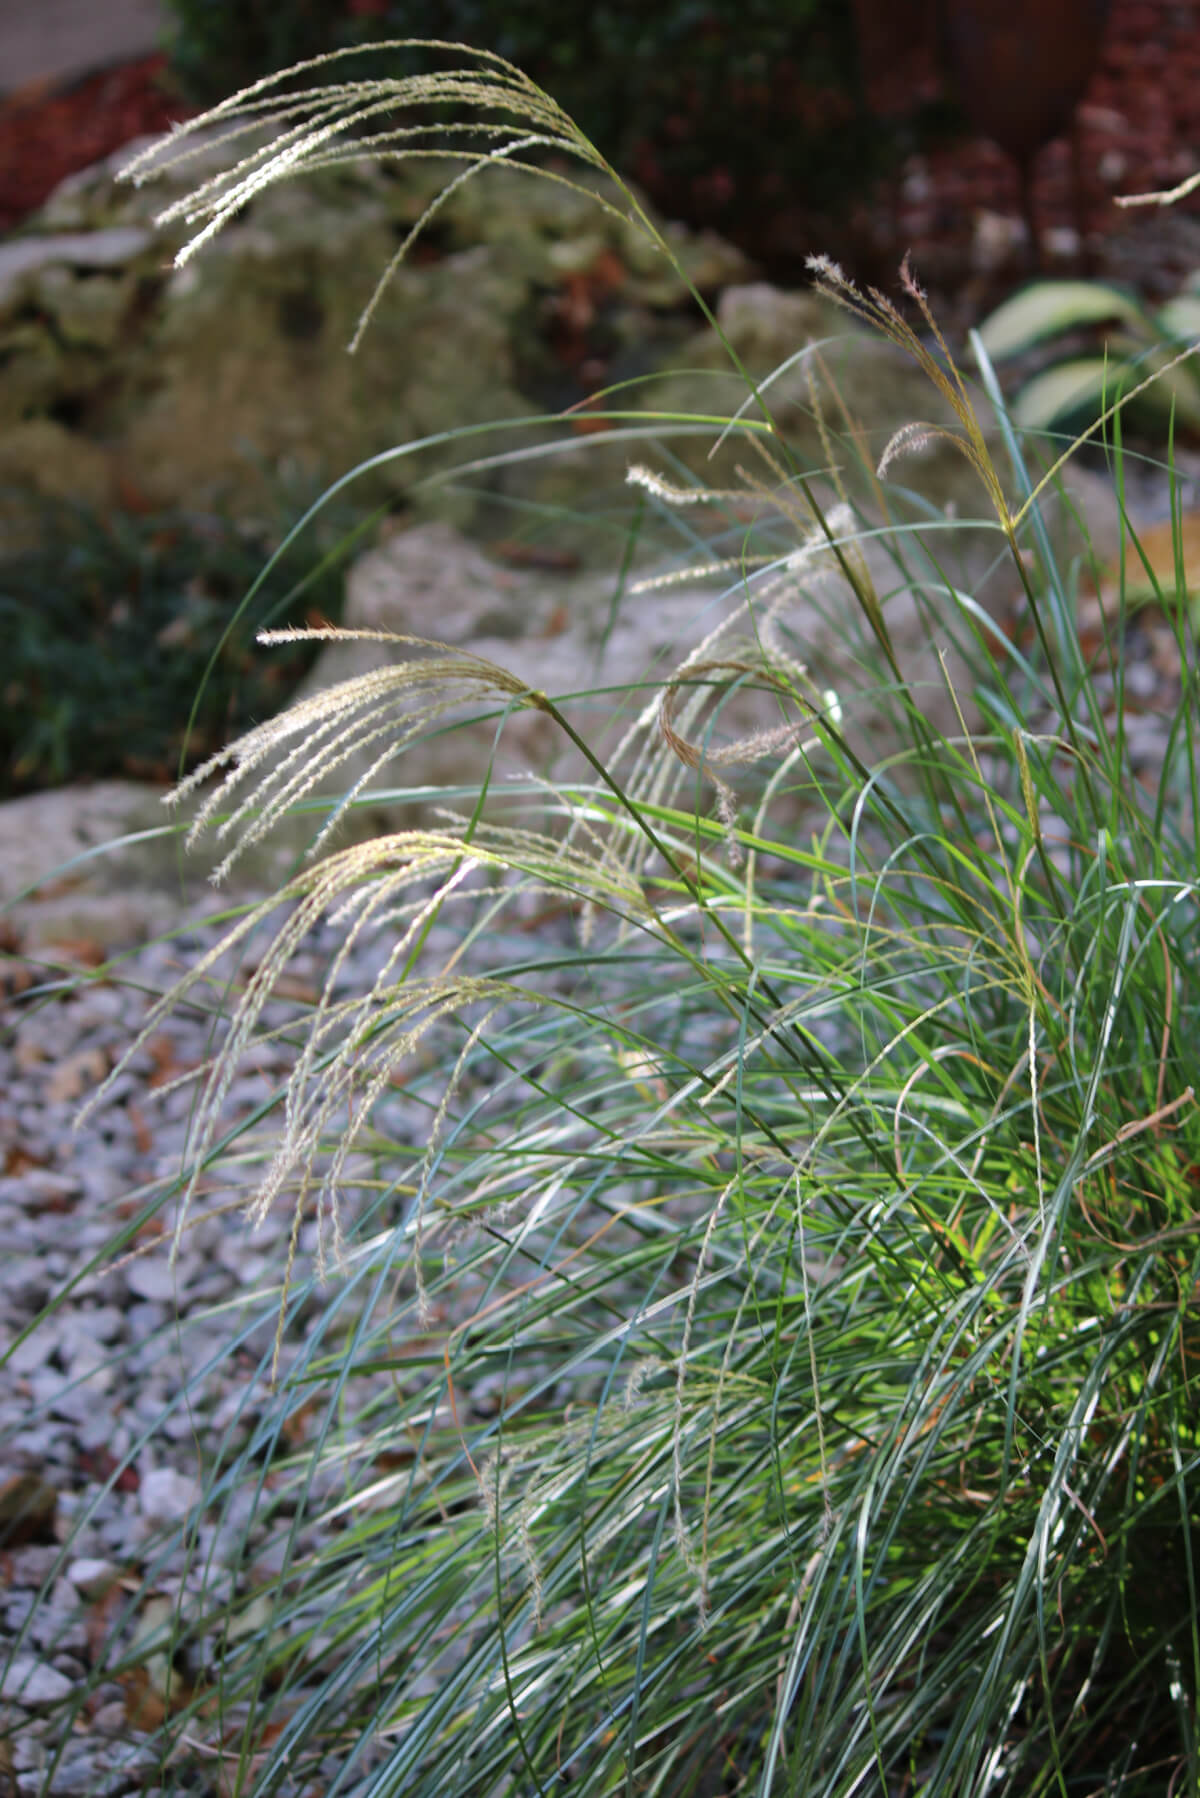 In Sunday Snippets 10.15.23, ornamental grass growing in my garden